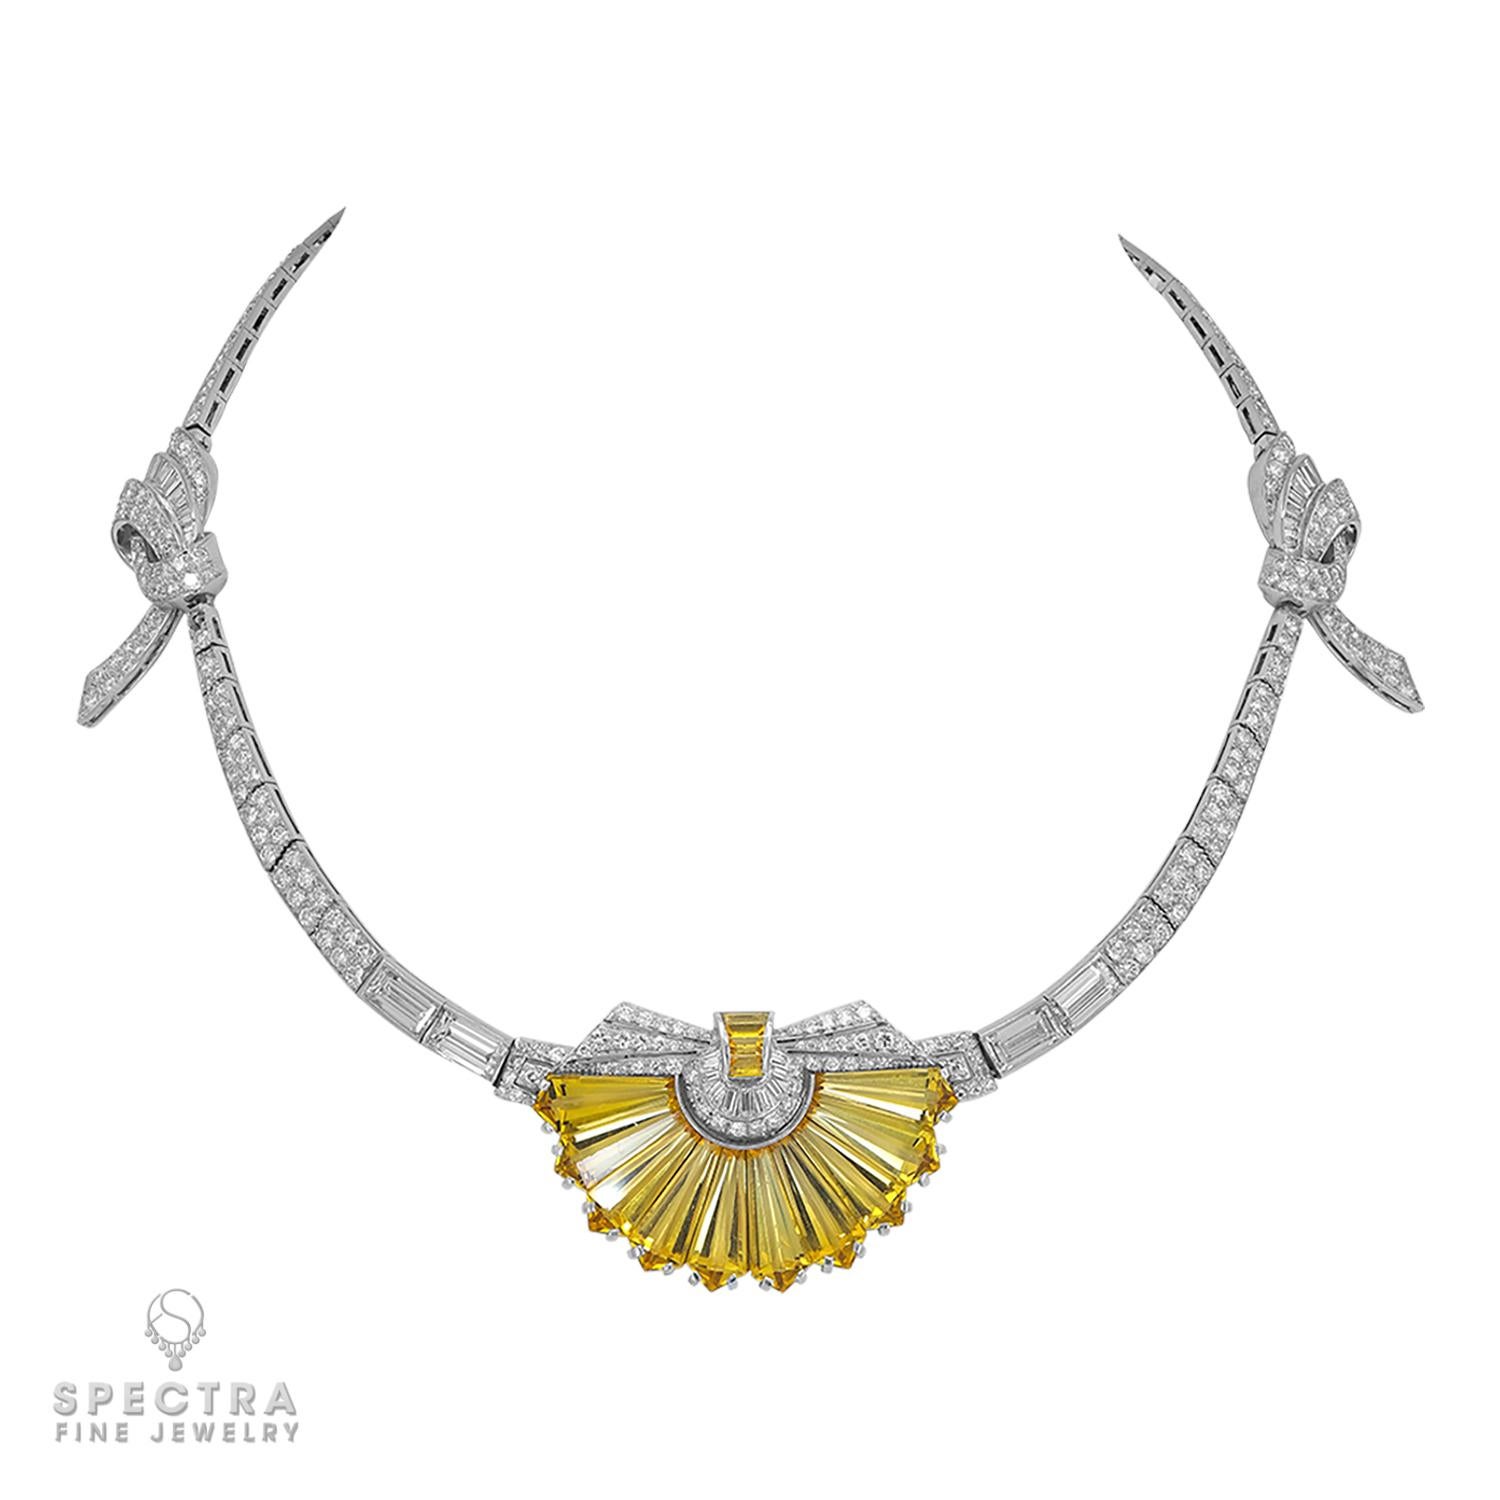 A stunning and unique necklace set at the front with a fan of elongated hexagonal-shaped yellow heliodors (beryl), with circular and baguette-cut diamond accents at the top, extending on either side to two rectangular-cut diamonds and the